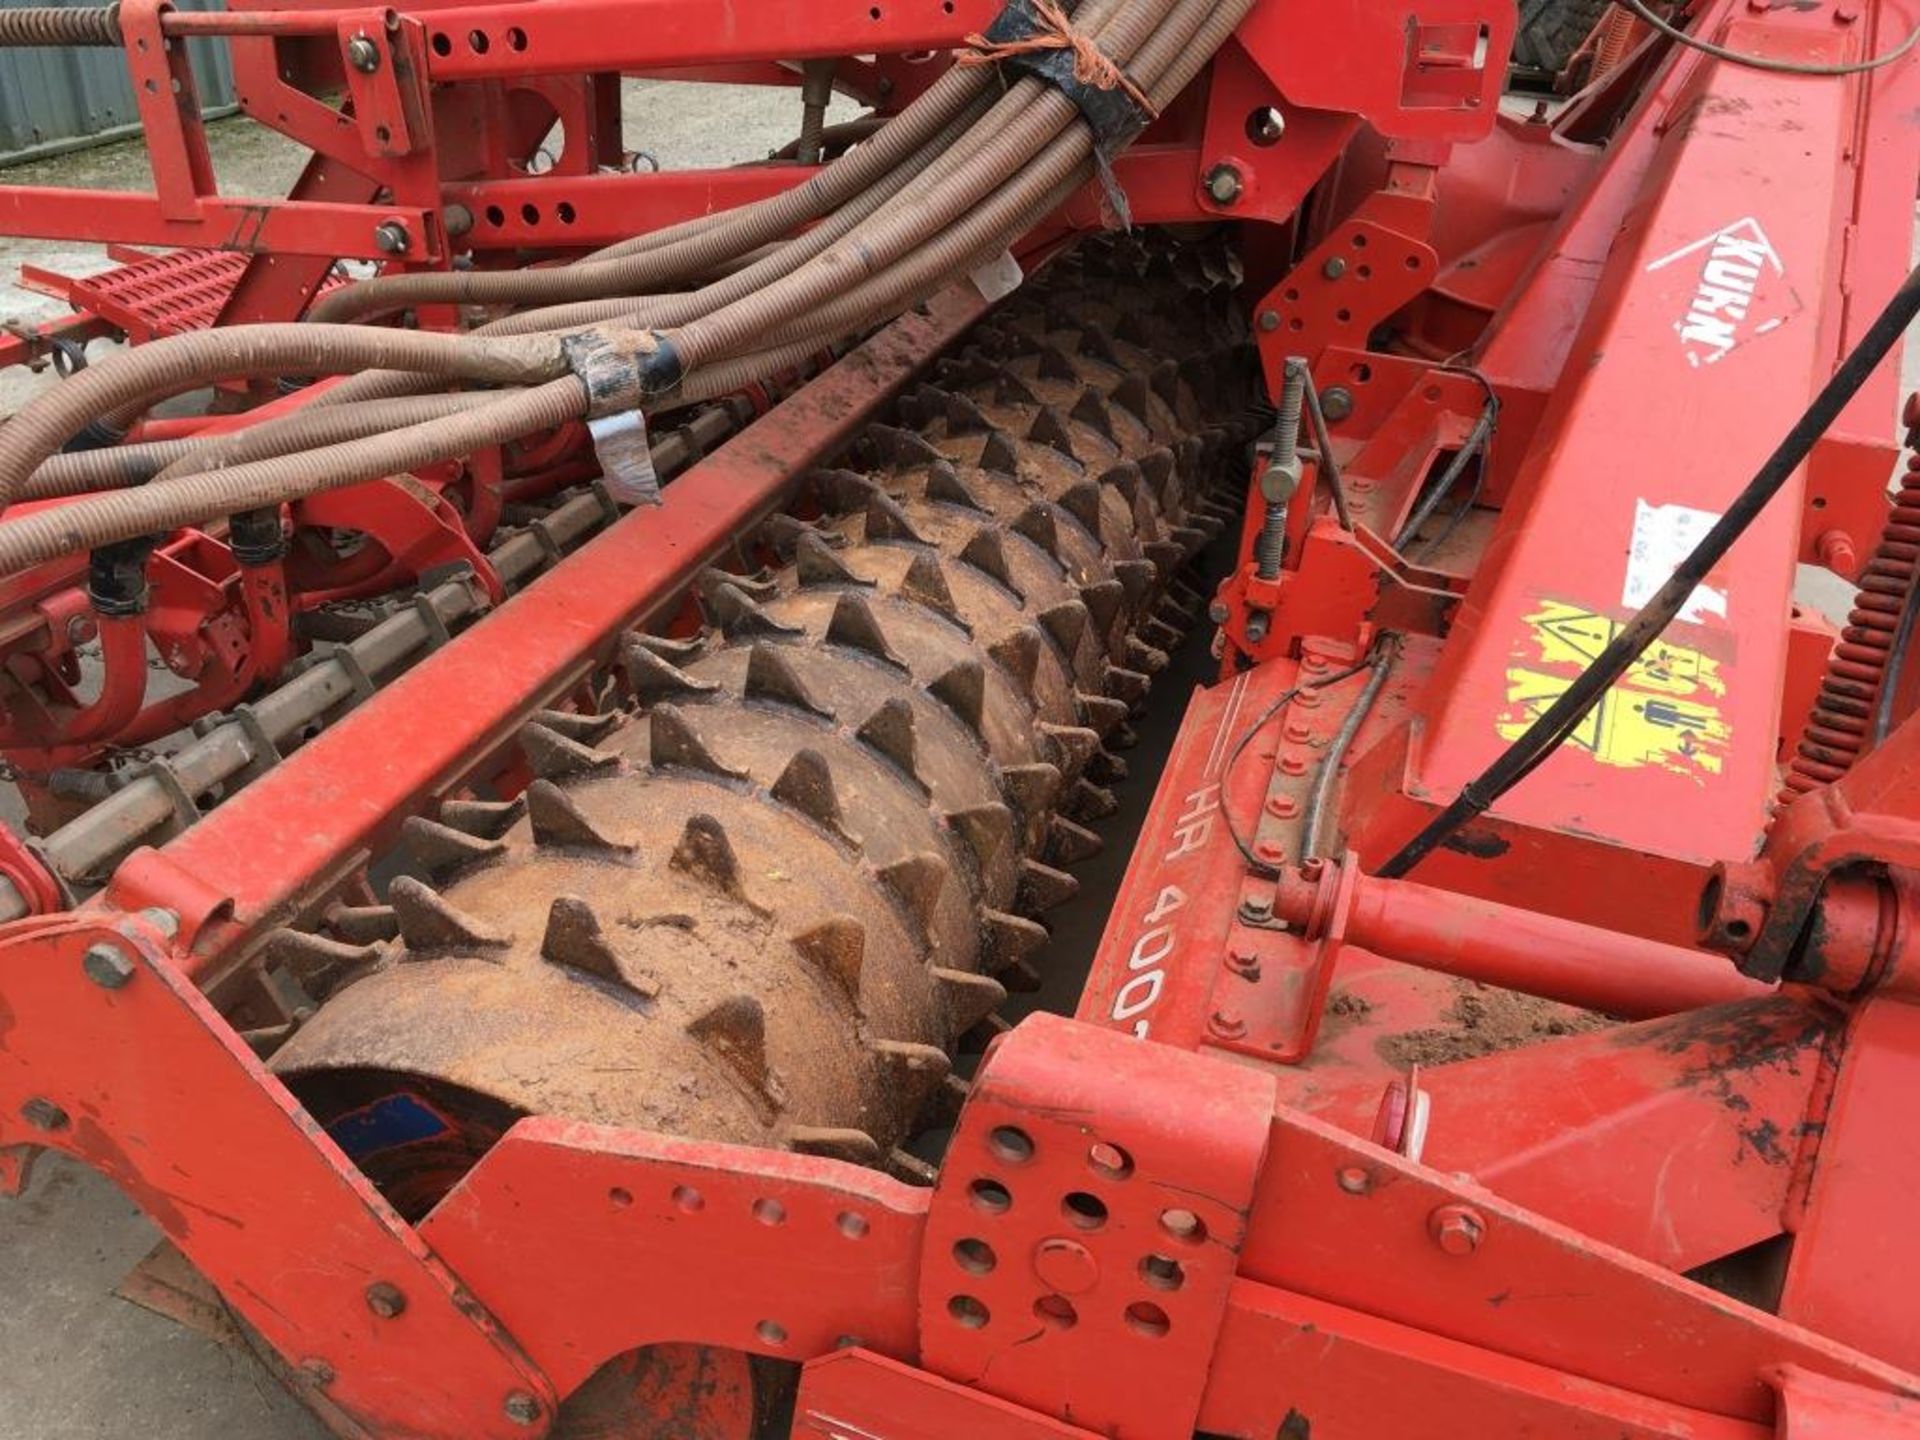 Kuhn HR 4003D 14' power harrow, serial number: A4631 (2002) with Kuhn Venta LC 402 seed drill, - Bild 8 aus 15